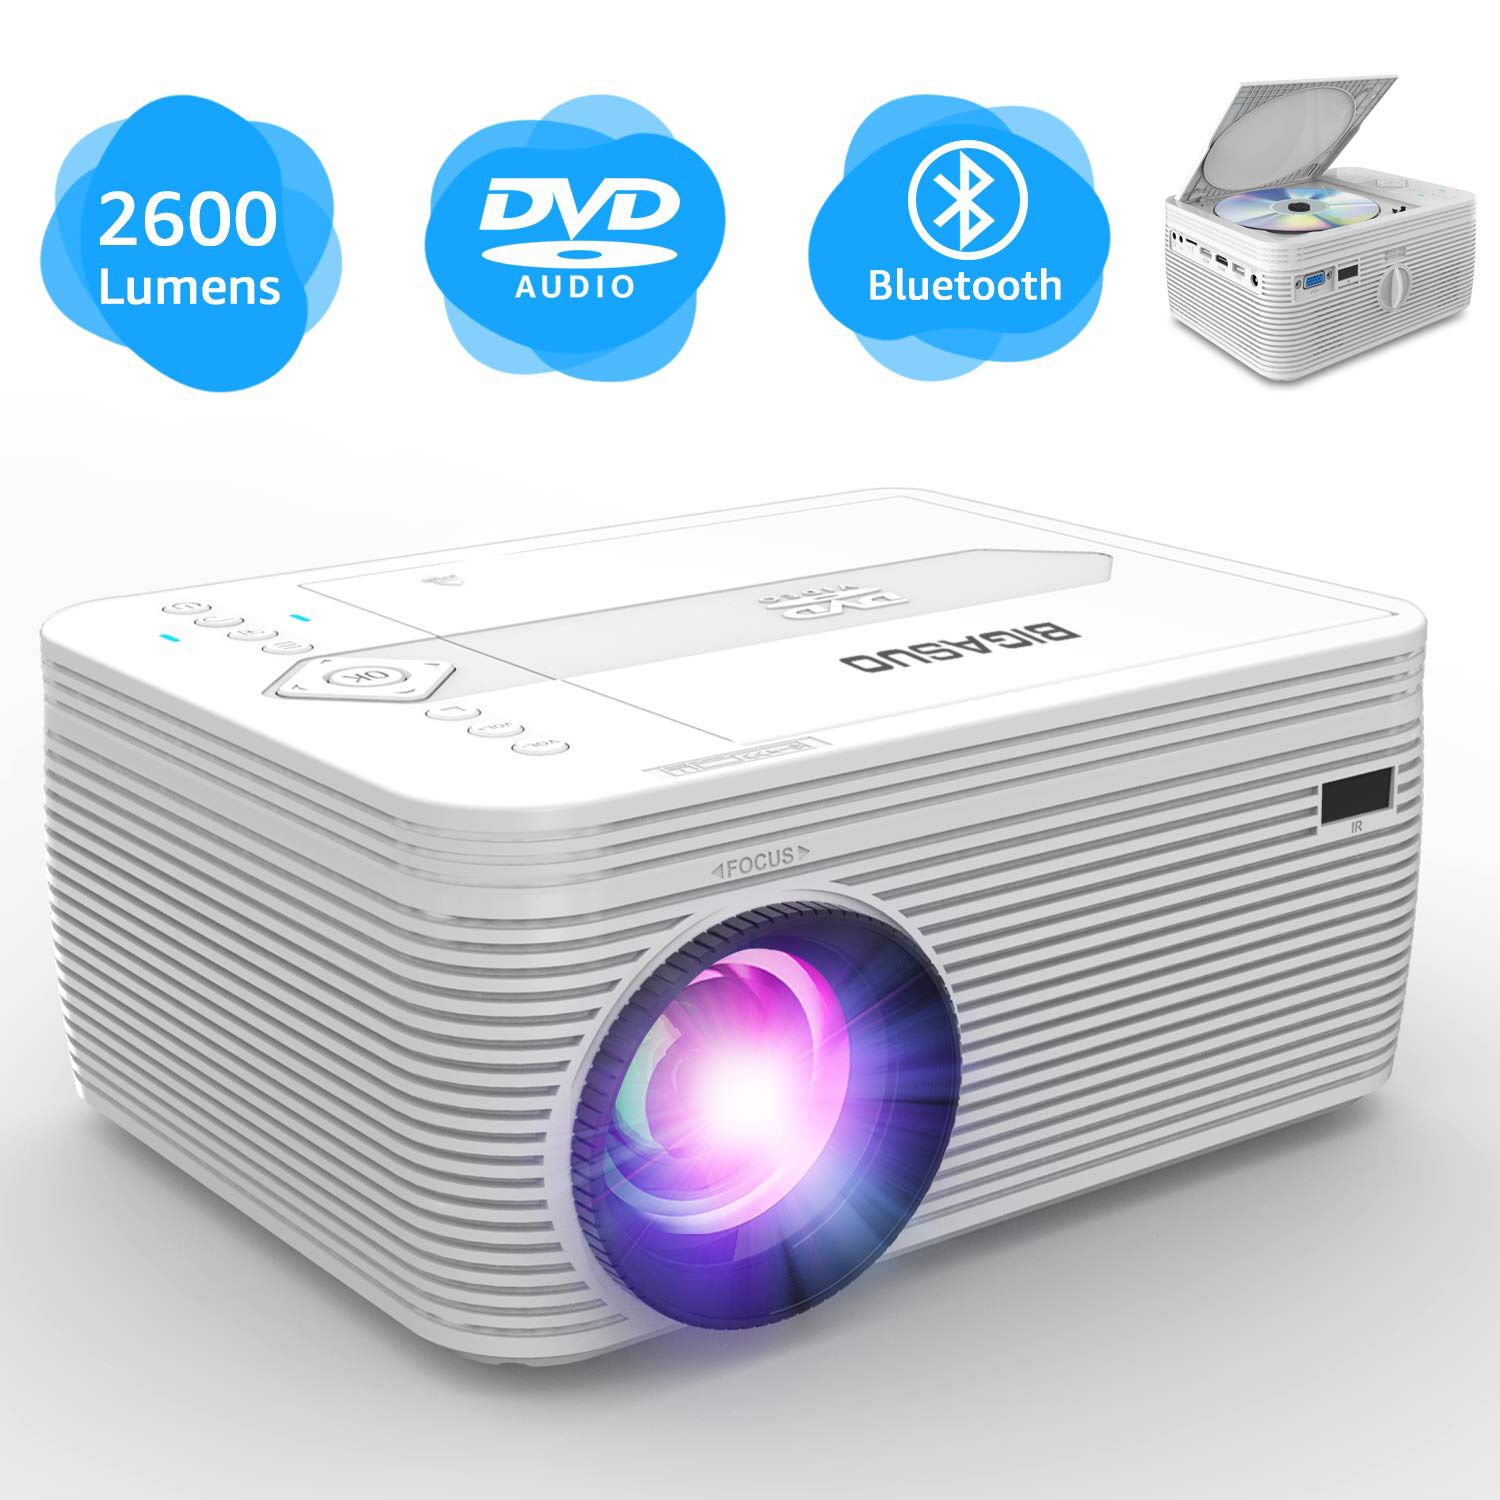 New Projector with DVD Player, Portable Bluetooth Projector 2600 Lumens Built in DVD Player, Mini Projector Compatible with Fire TV Stick, Roku, PS4,